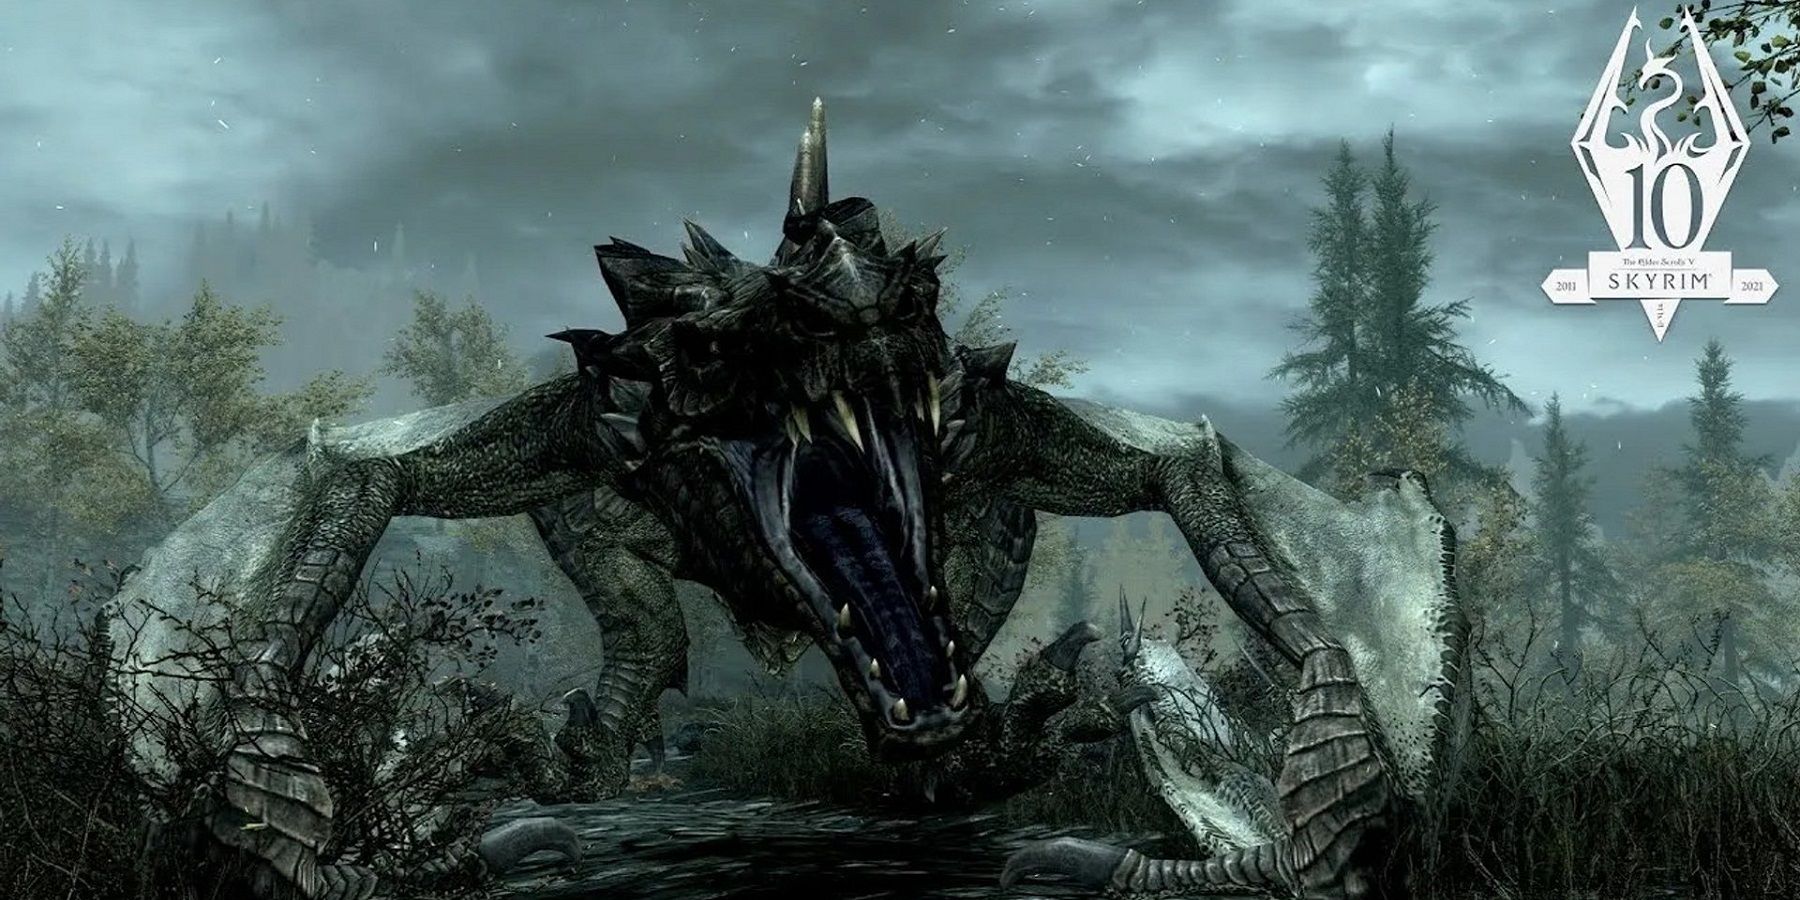 An image from the Elder Scrolls 5: skyrim showing a dragon roaring on the ground.